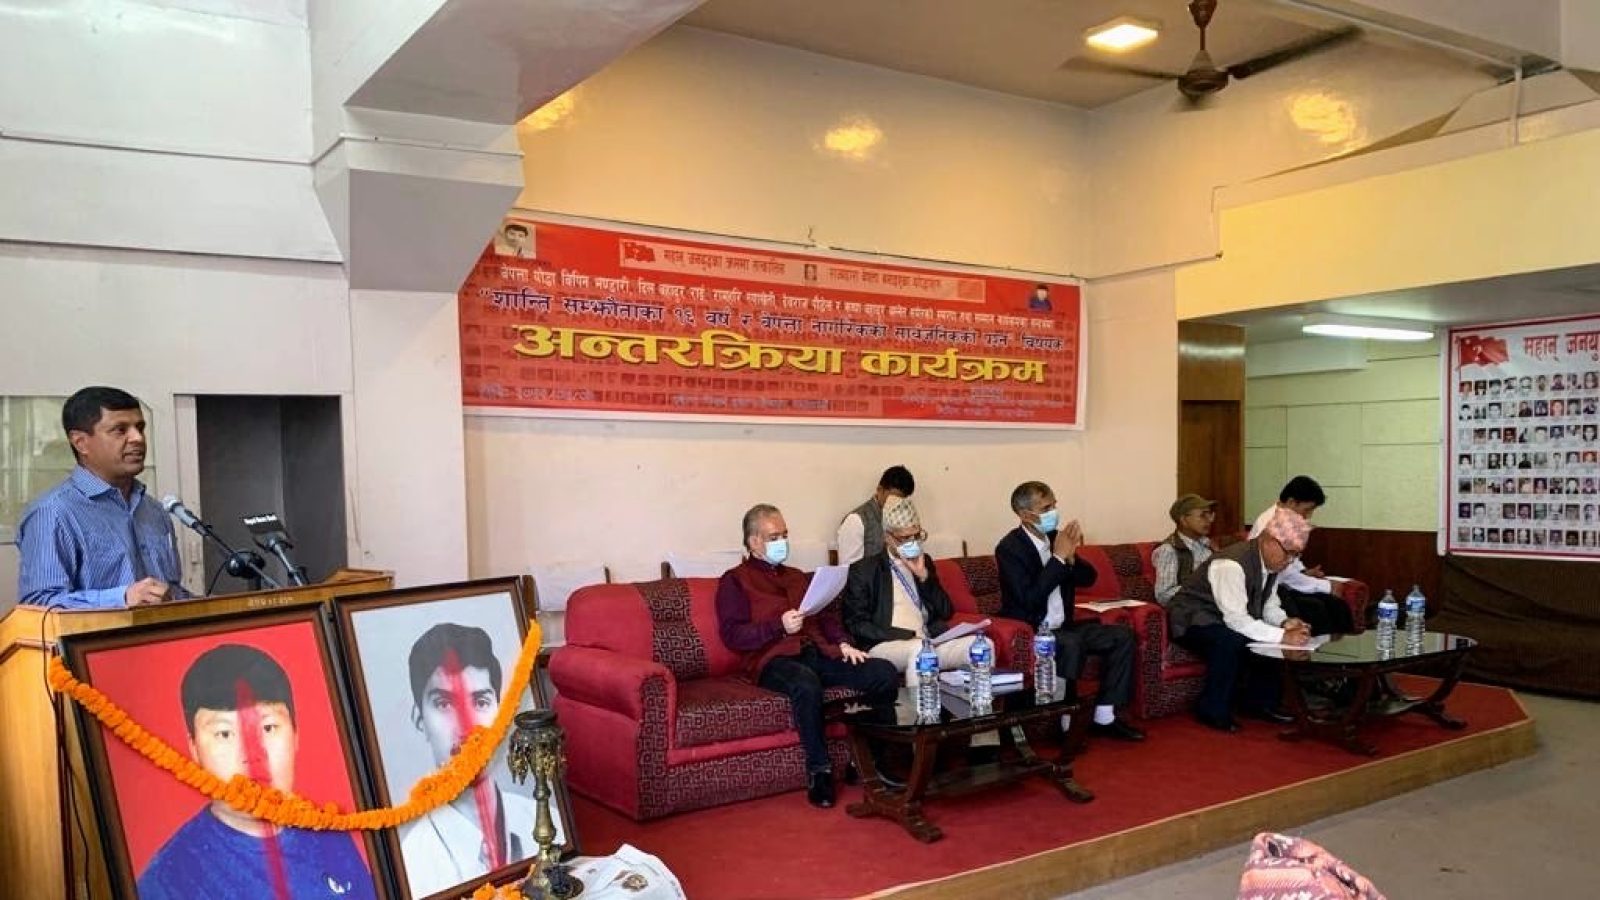 Panelists sit on red couches at a commemoration event in Kathmandu.